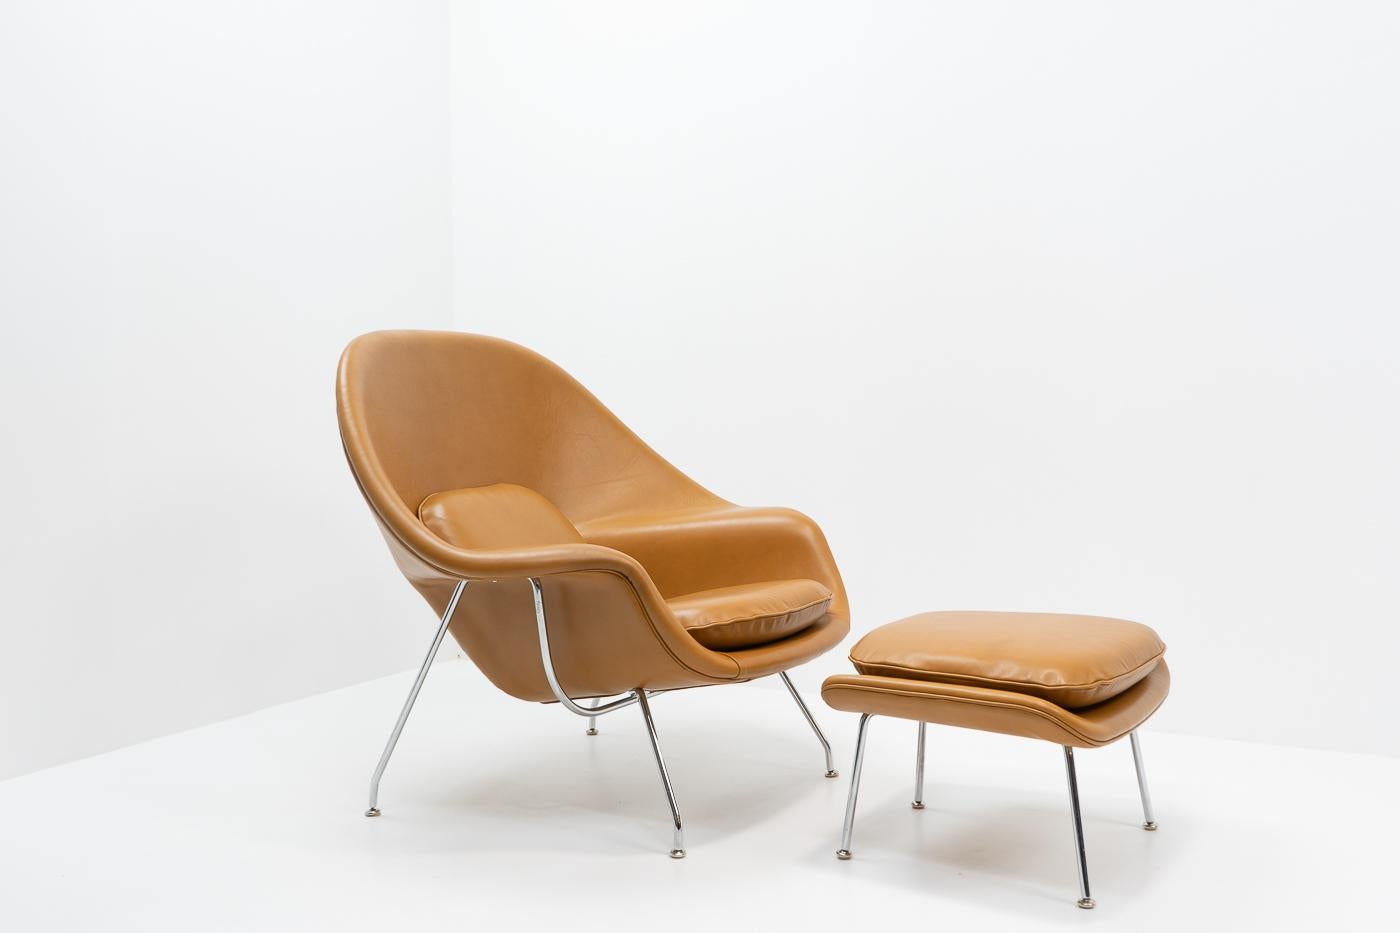 Indulge in comfort with the Womb Chair, designed by Eero Saarinen and produced by Knoll. This iconic chair showcases Saarinen’s visionary design, and Knoll’s commitment to exceptional craftsmanship.

We have selected an Italian wax finished, full